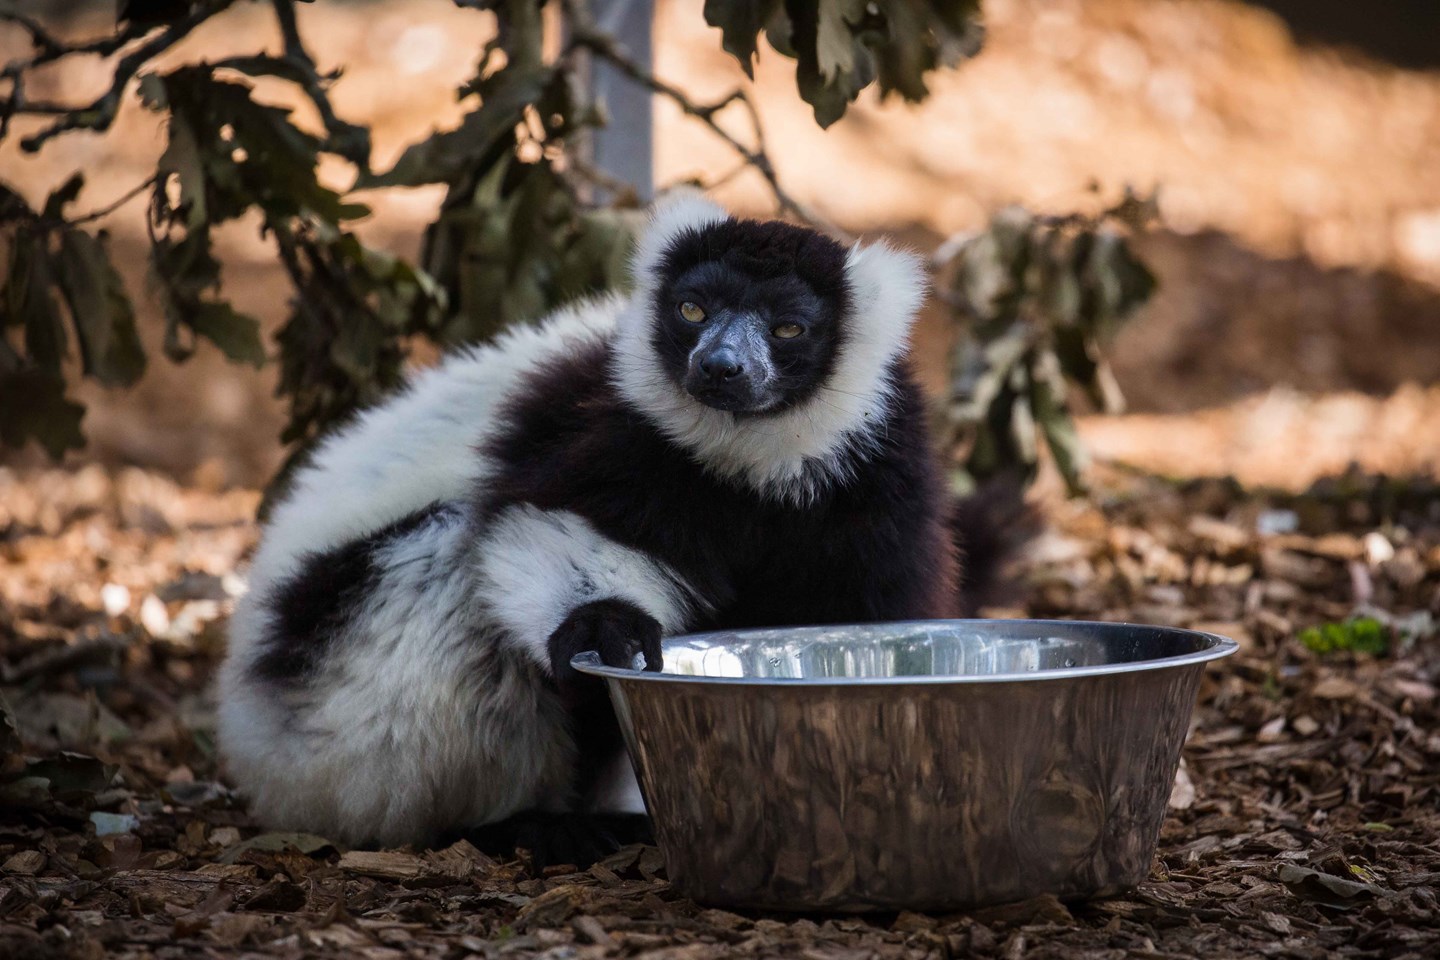 Black and white ruffed lemur drinks from metal bowl on ground